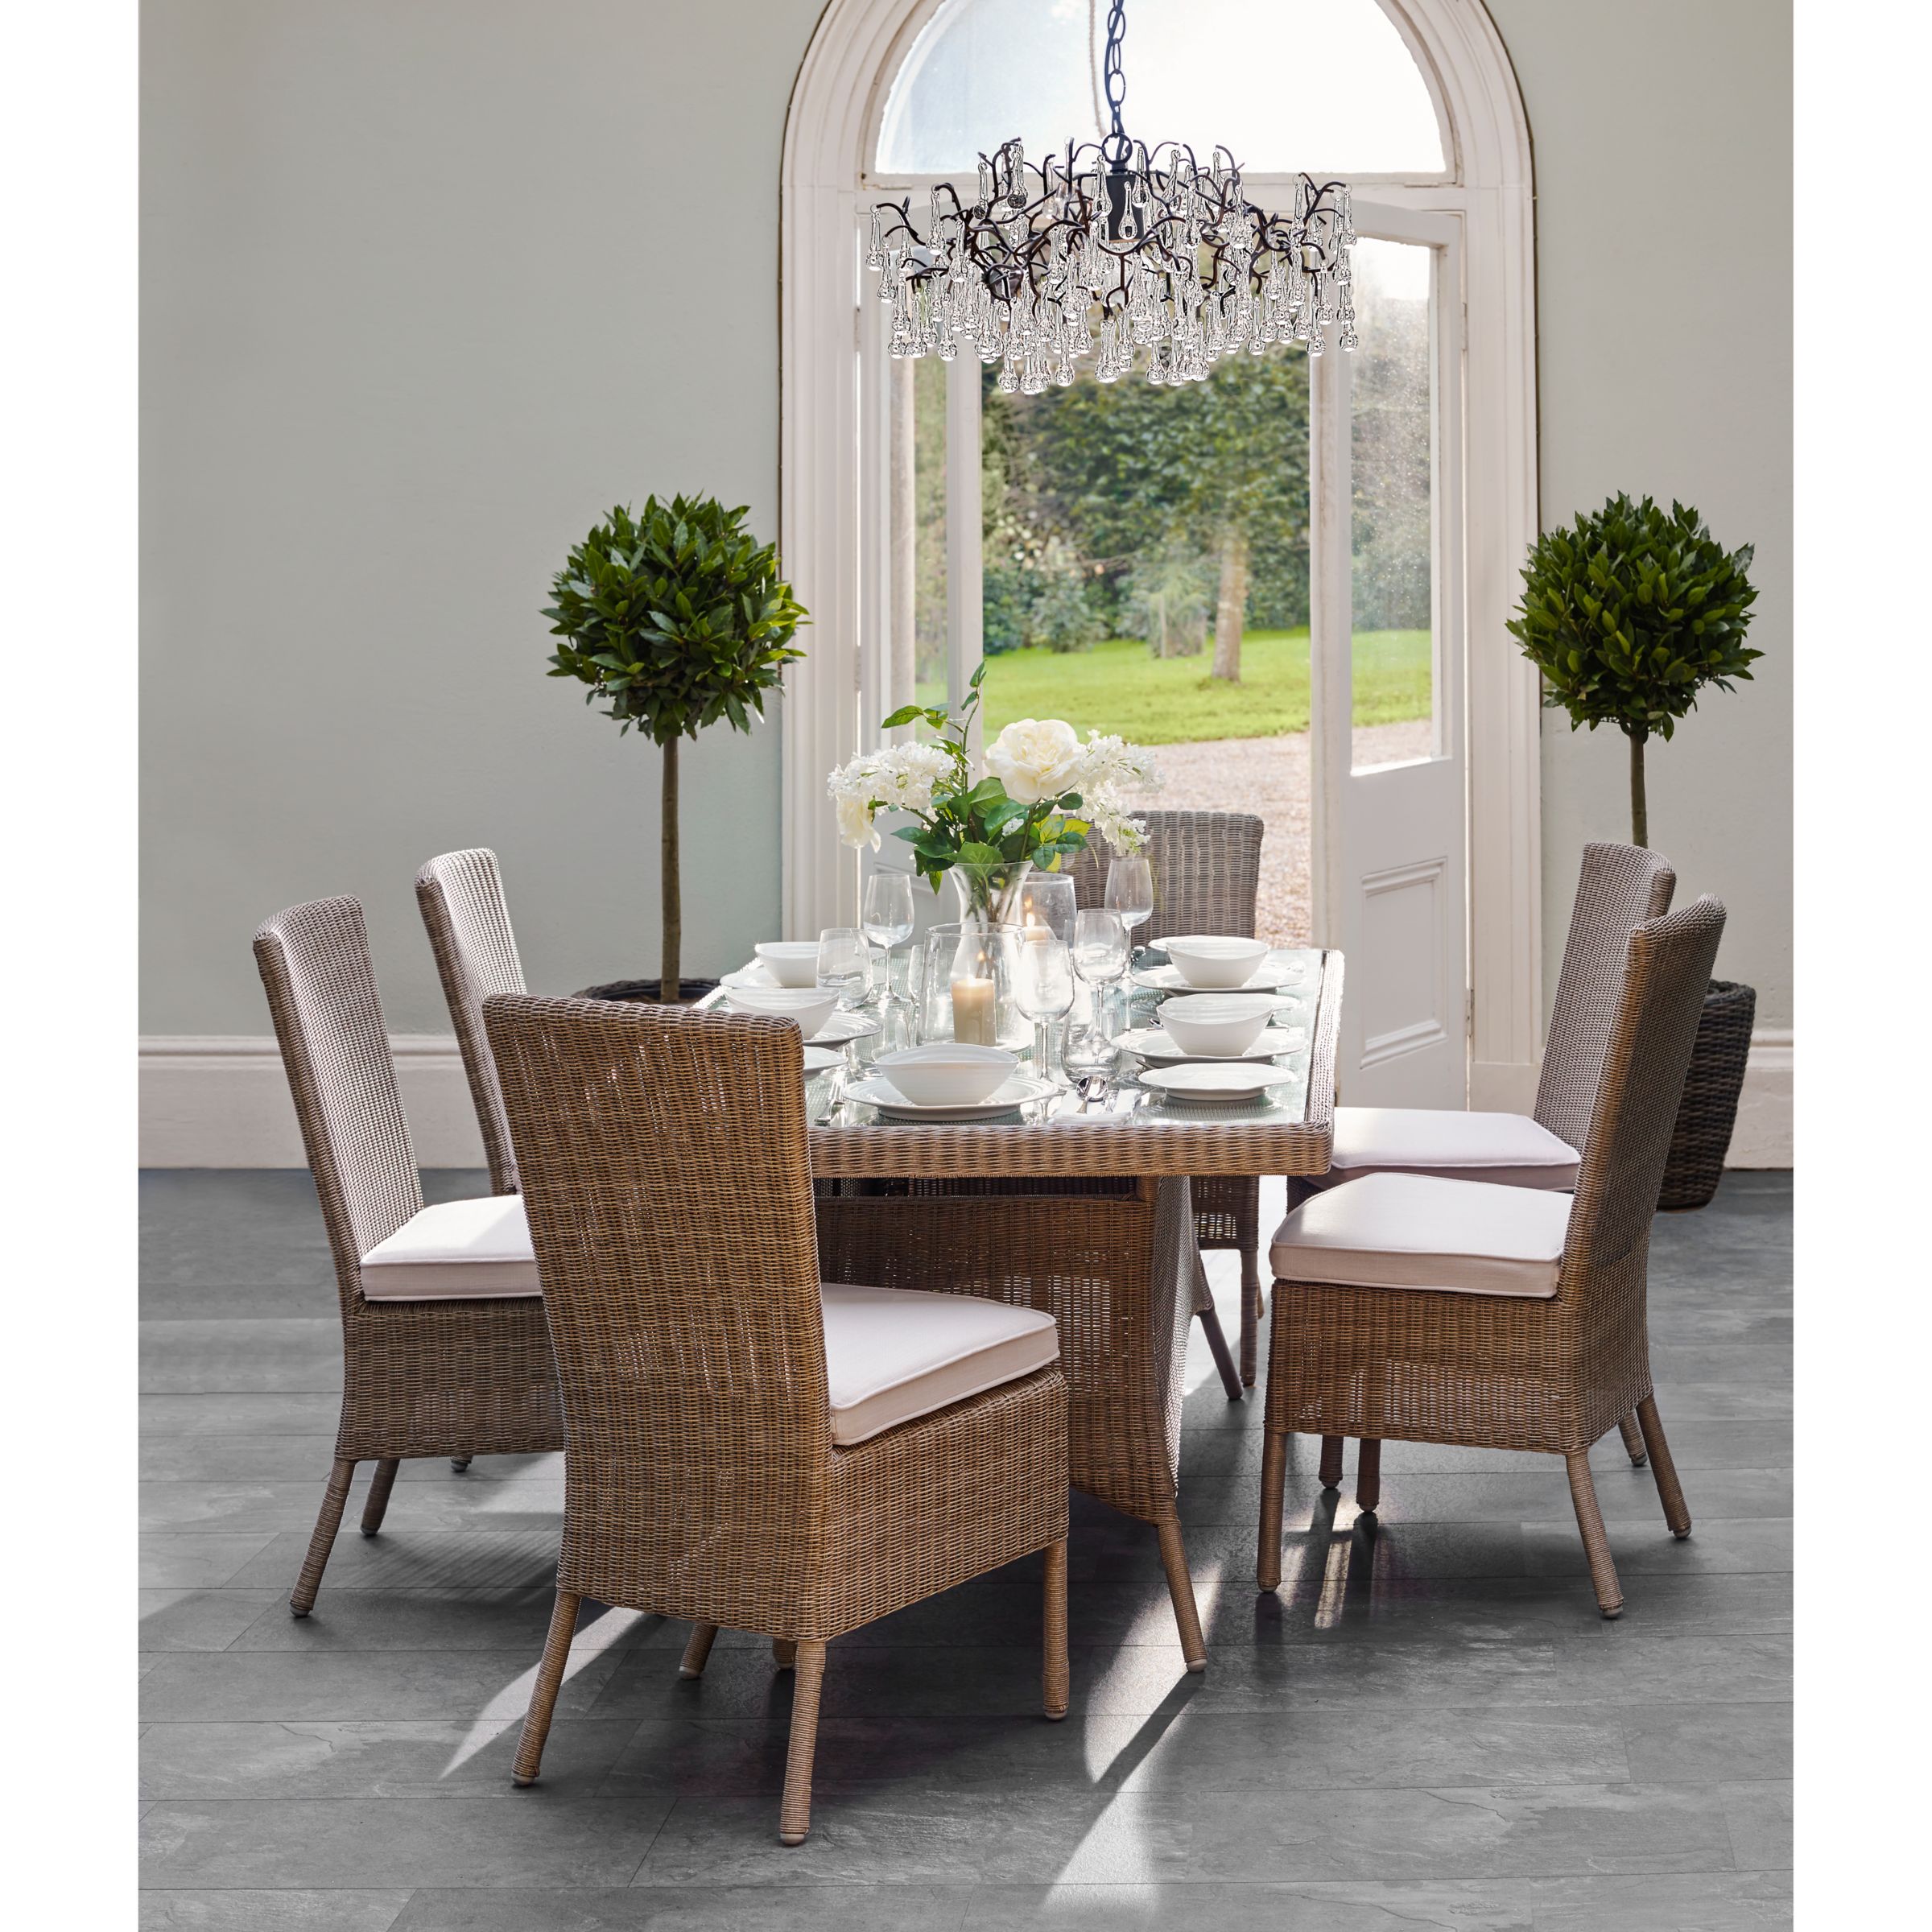 John Lewis & Partners Eve Outdoor Dining Table & Chairs Set at John